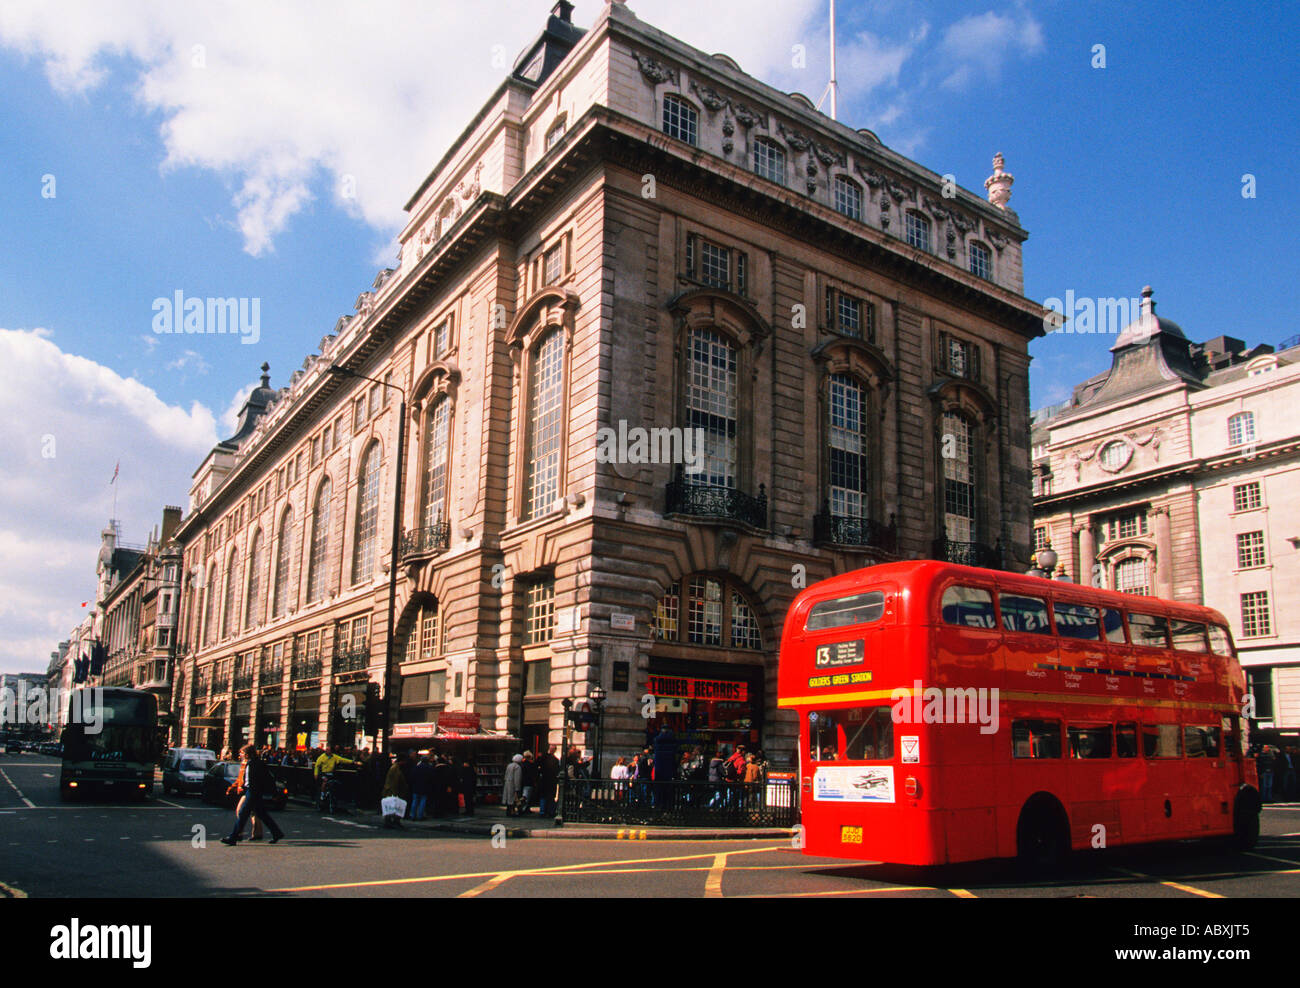 Europe England Great Britain United Kingdom London Regent Street West End Mayfair Piccadilly Circus red double decker London bus Stock Photo